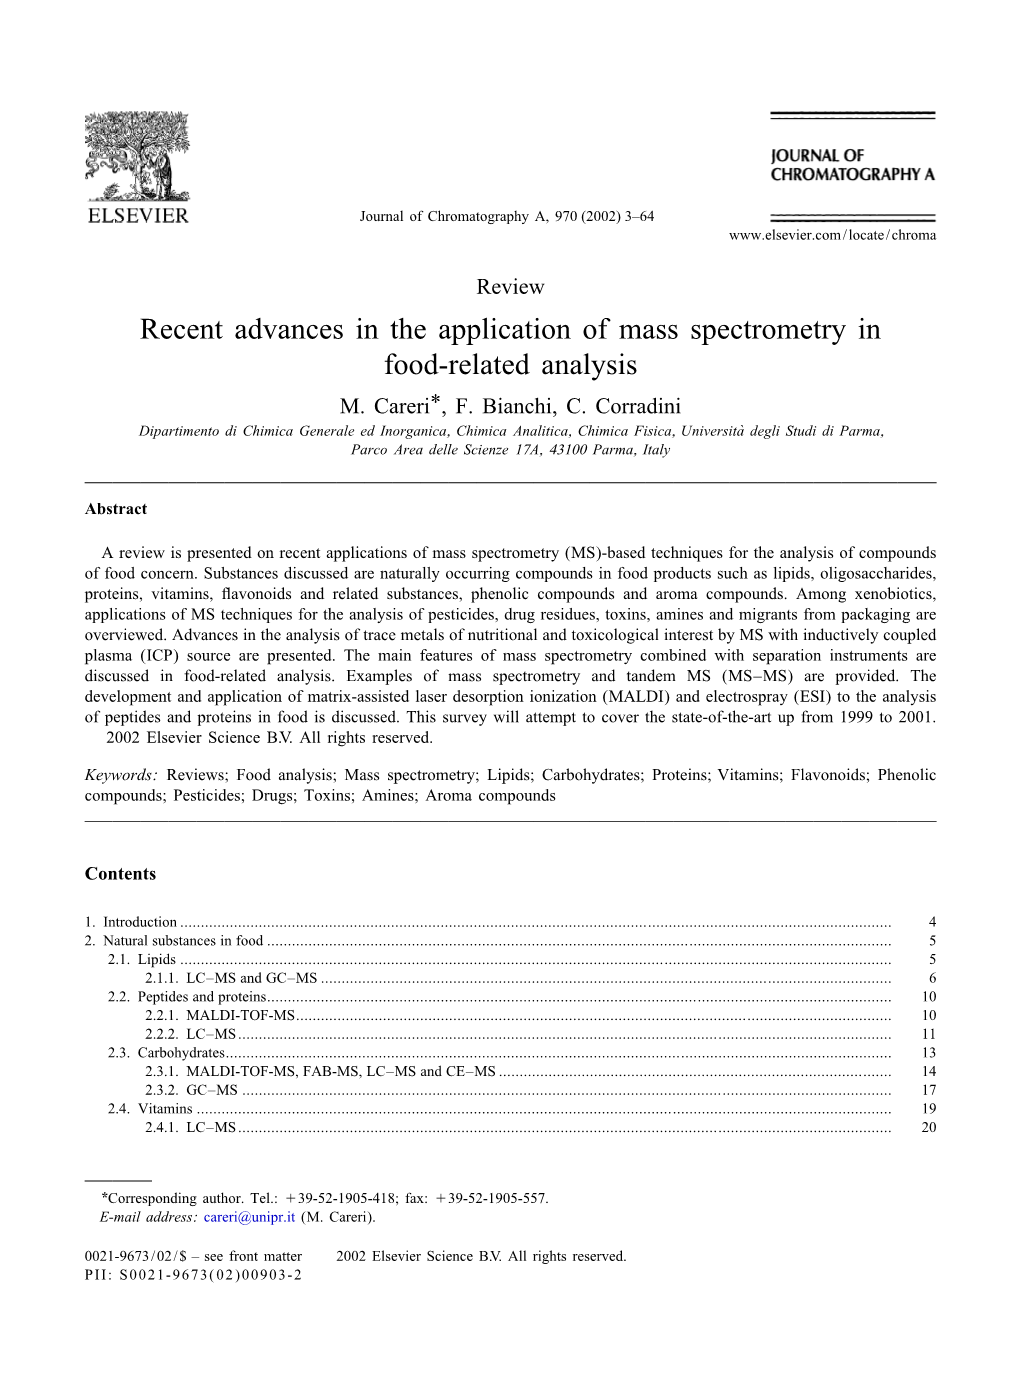 R Ecent Advances in the Application of Mass Spectrometry in Food-Related Analysis M